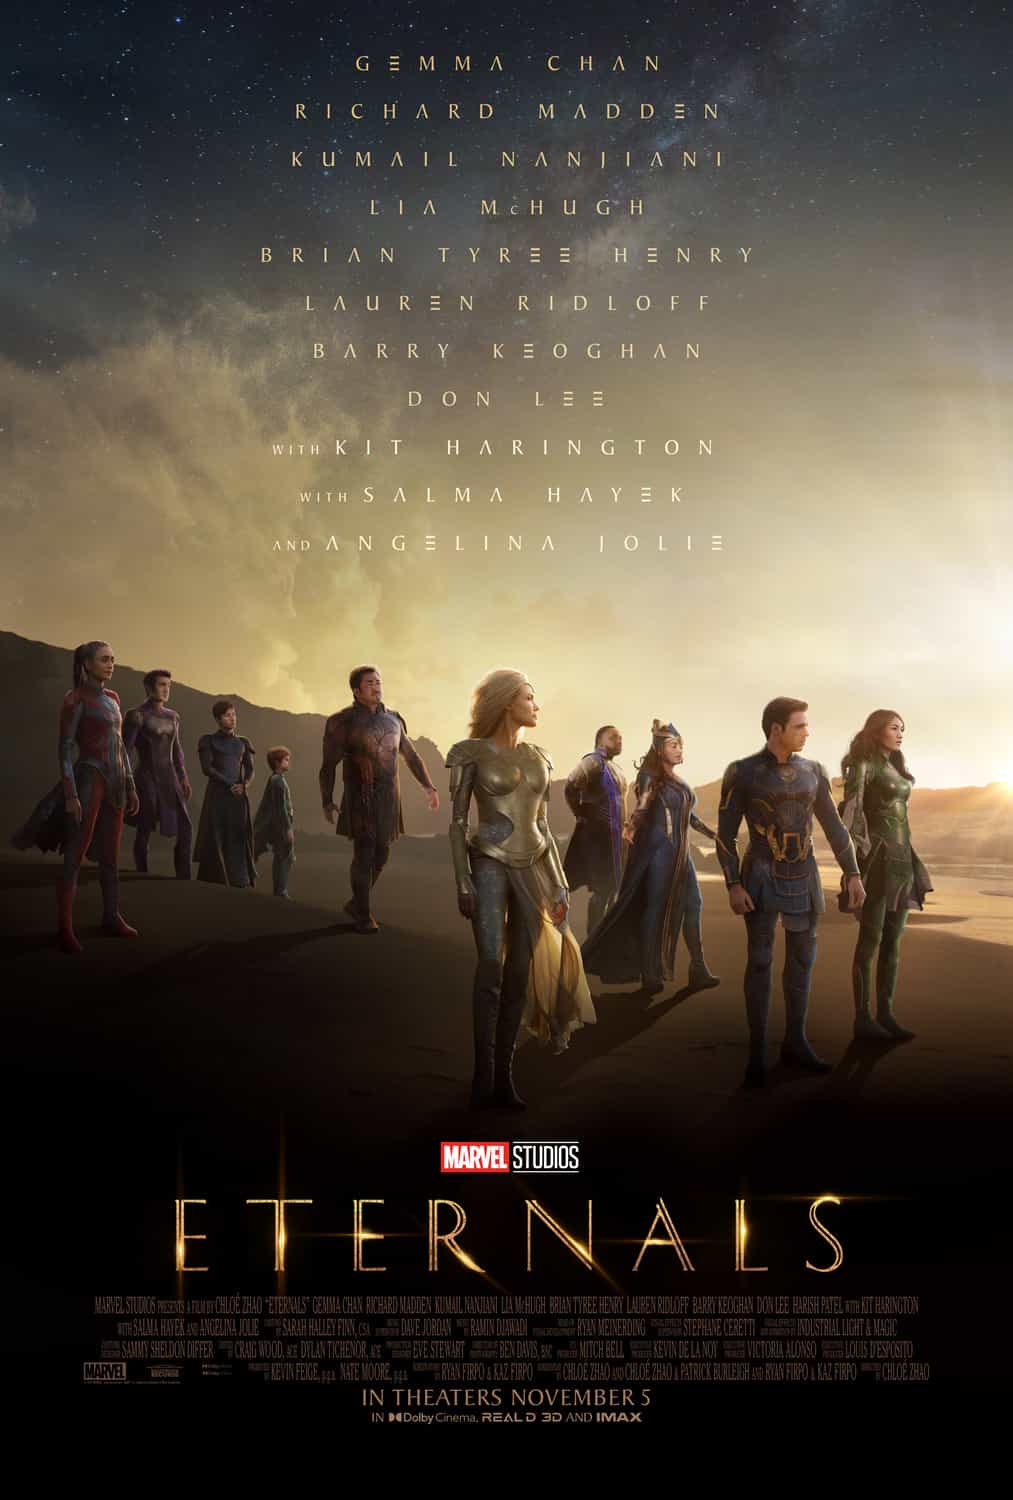 UK Box Office Weekend Report 5th - 7th November 2021:  Eternals from Marvel Studios makes its debut at the top with a 5.5 million pound opening weekend